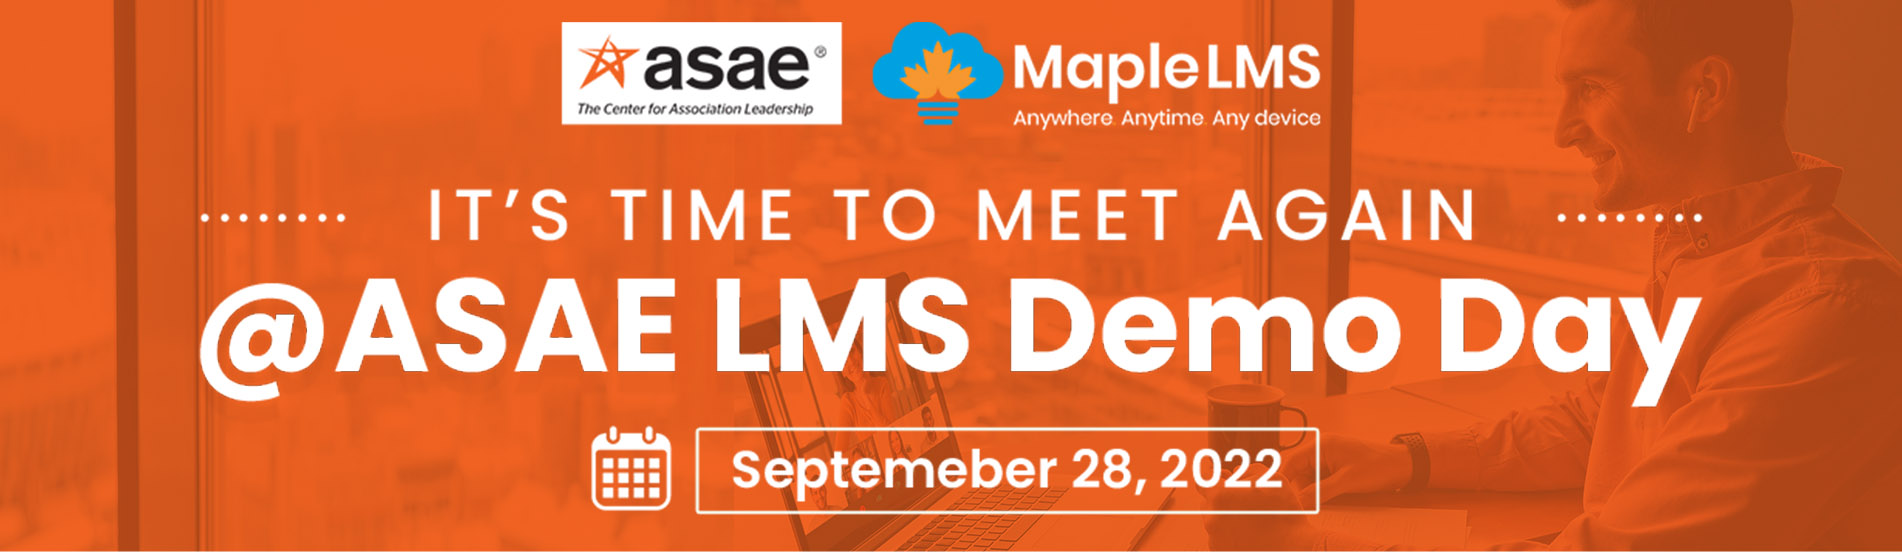 asae-lms-demo-day-banner